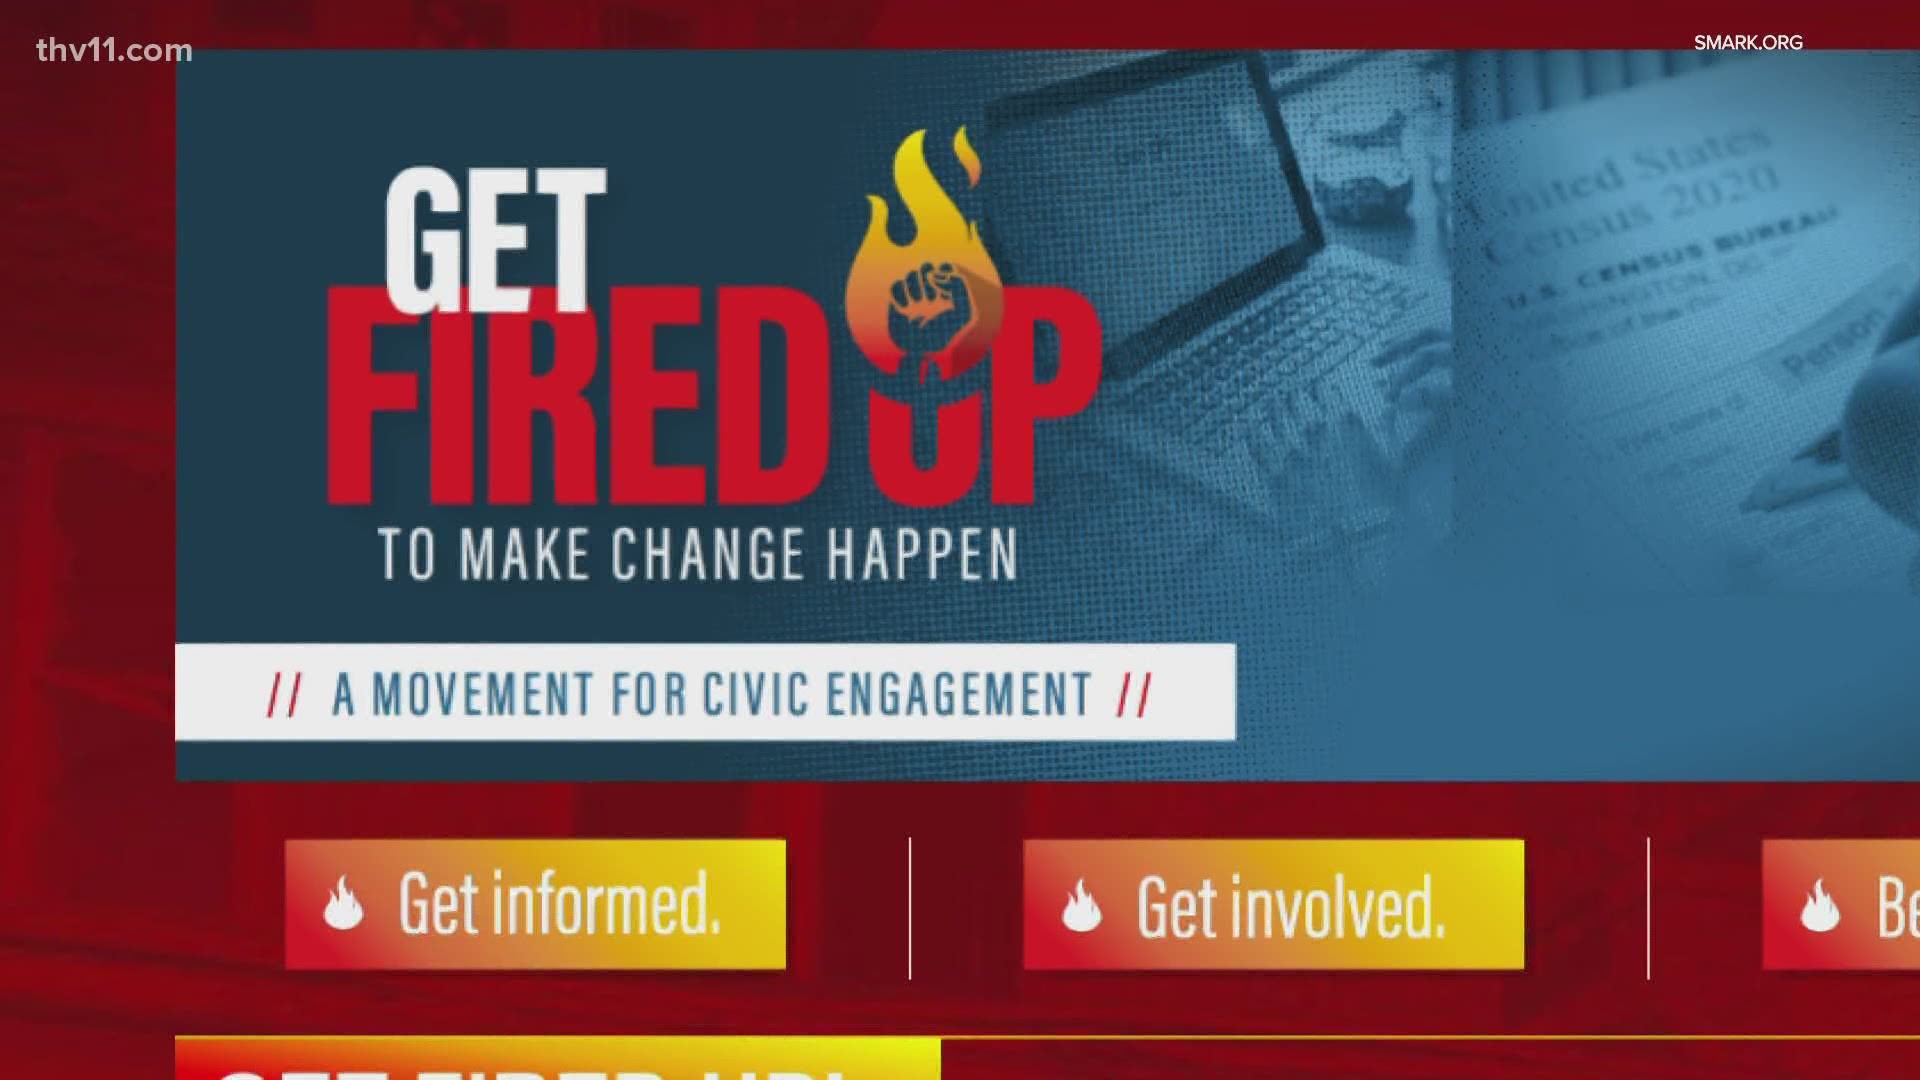 In a recently rolled out campaign by Little Rock's St. Mark Baptist Church, they're urging the community to get fired up to make change happen.